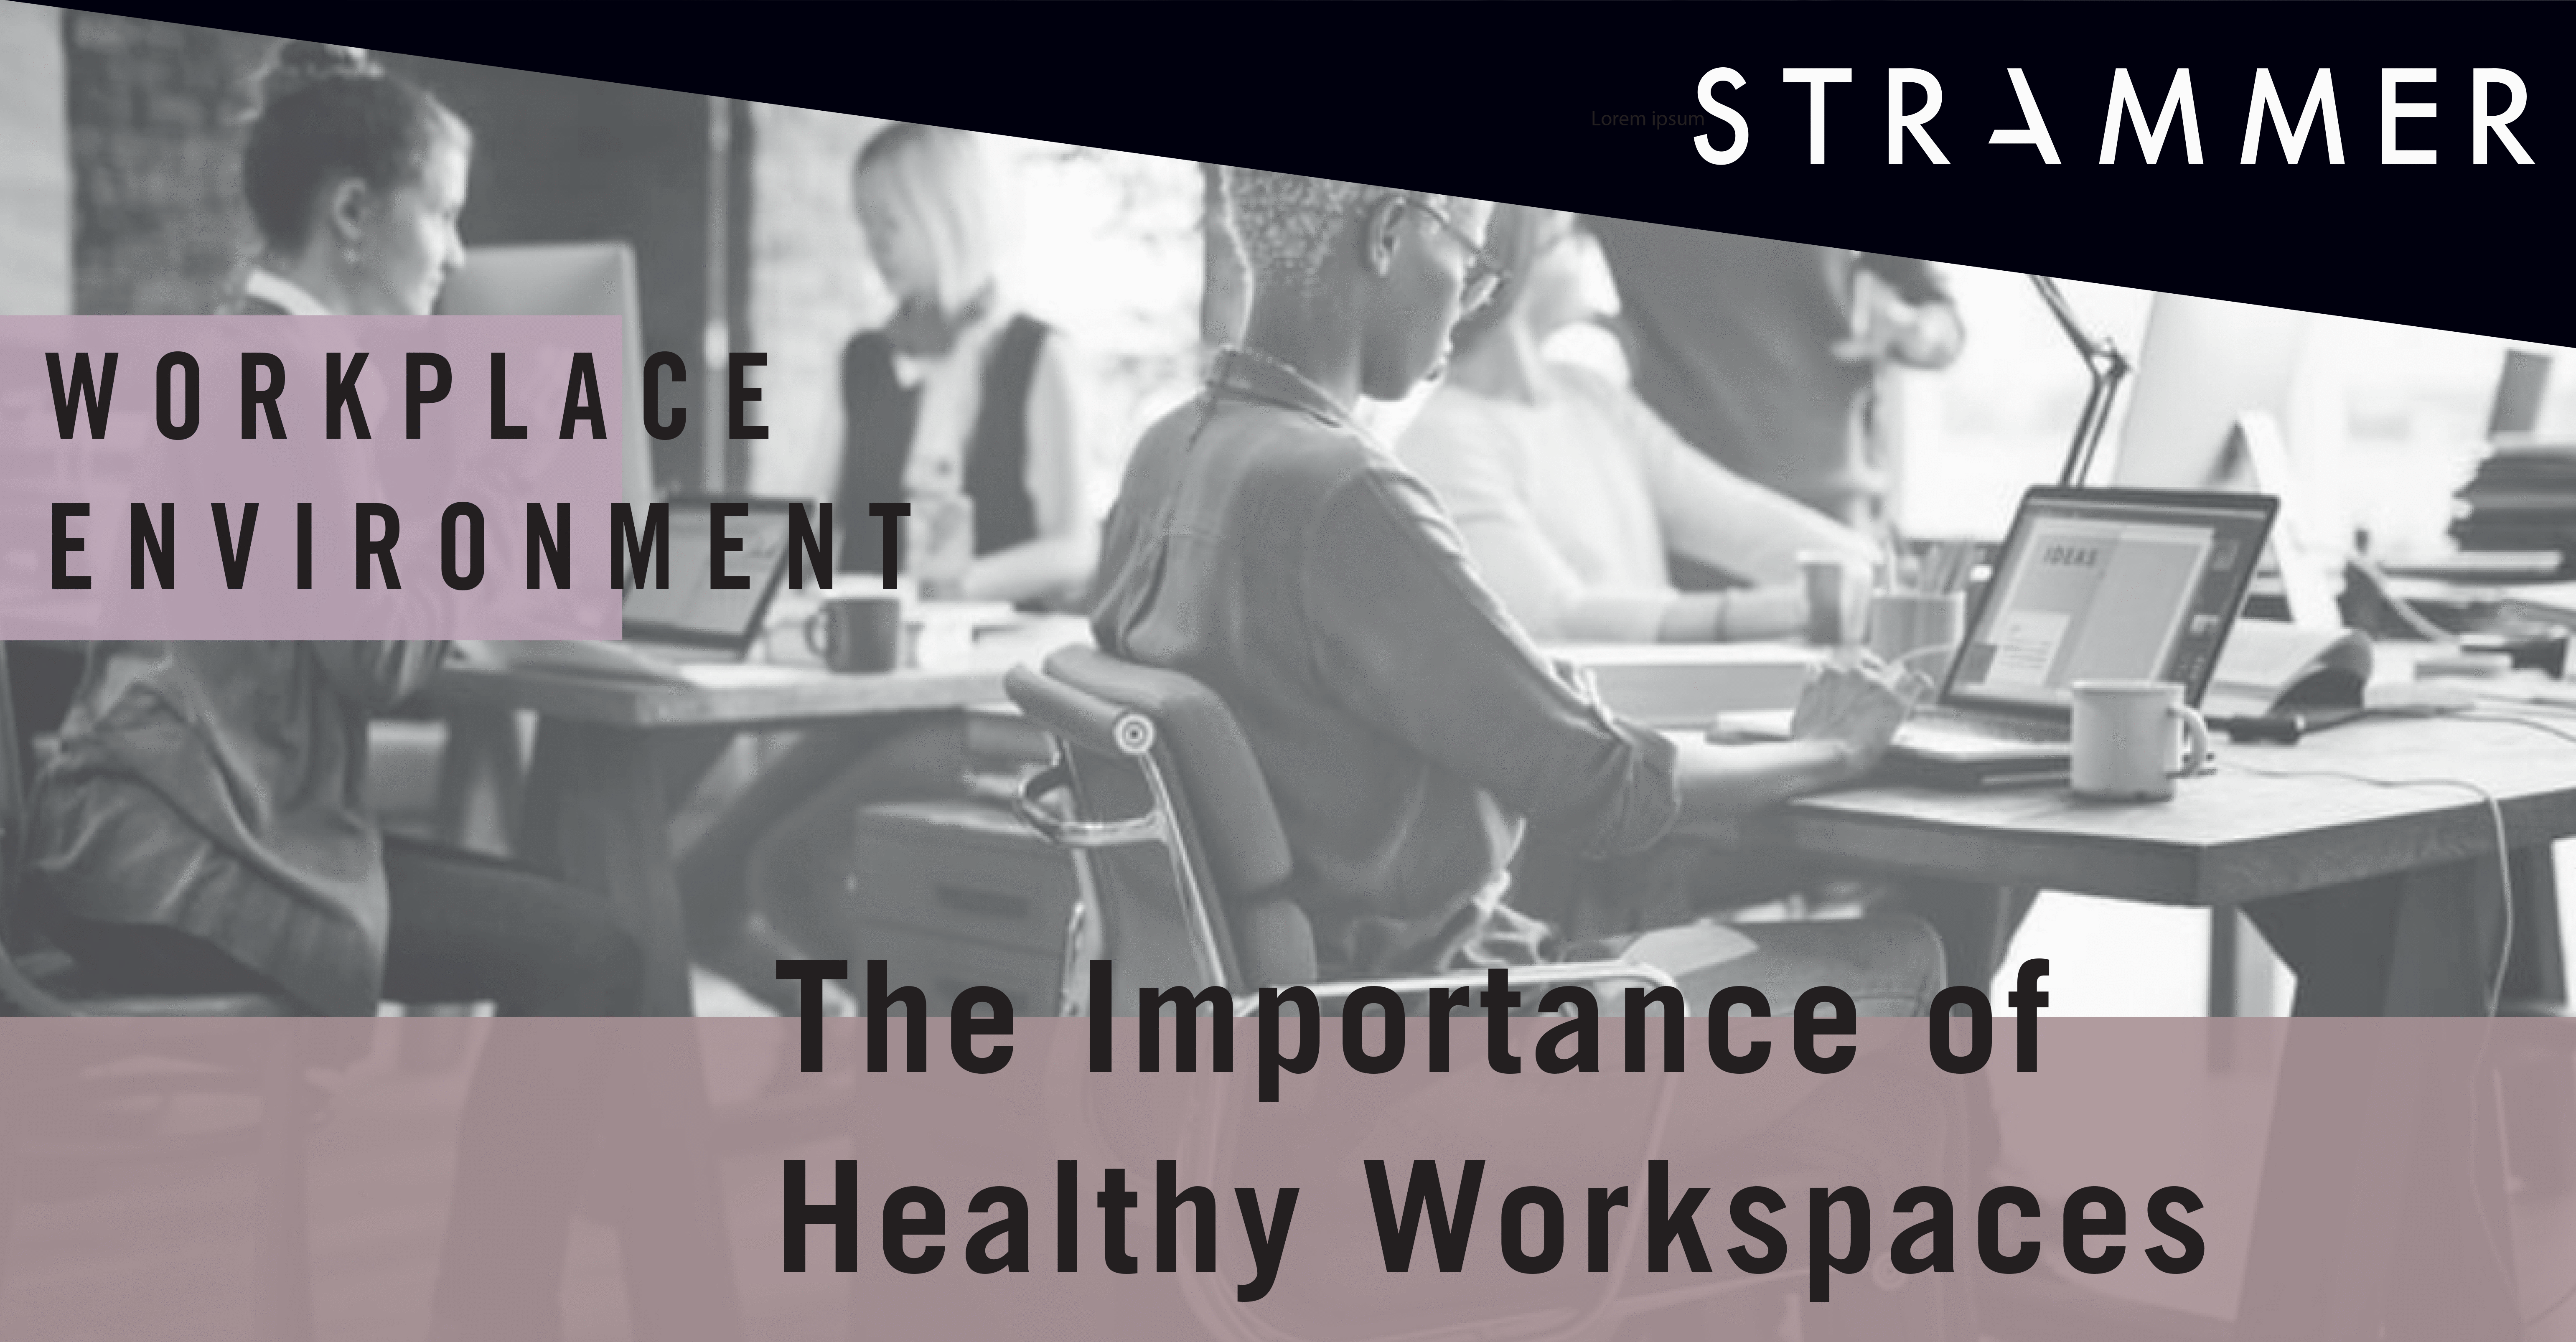 Healthy Workplace: How to Achieve One?